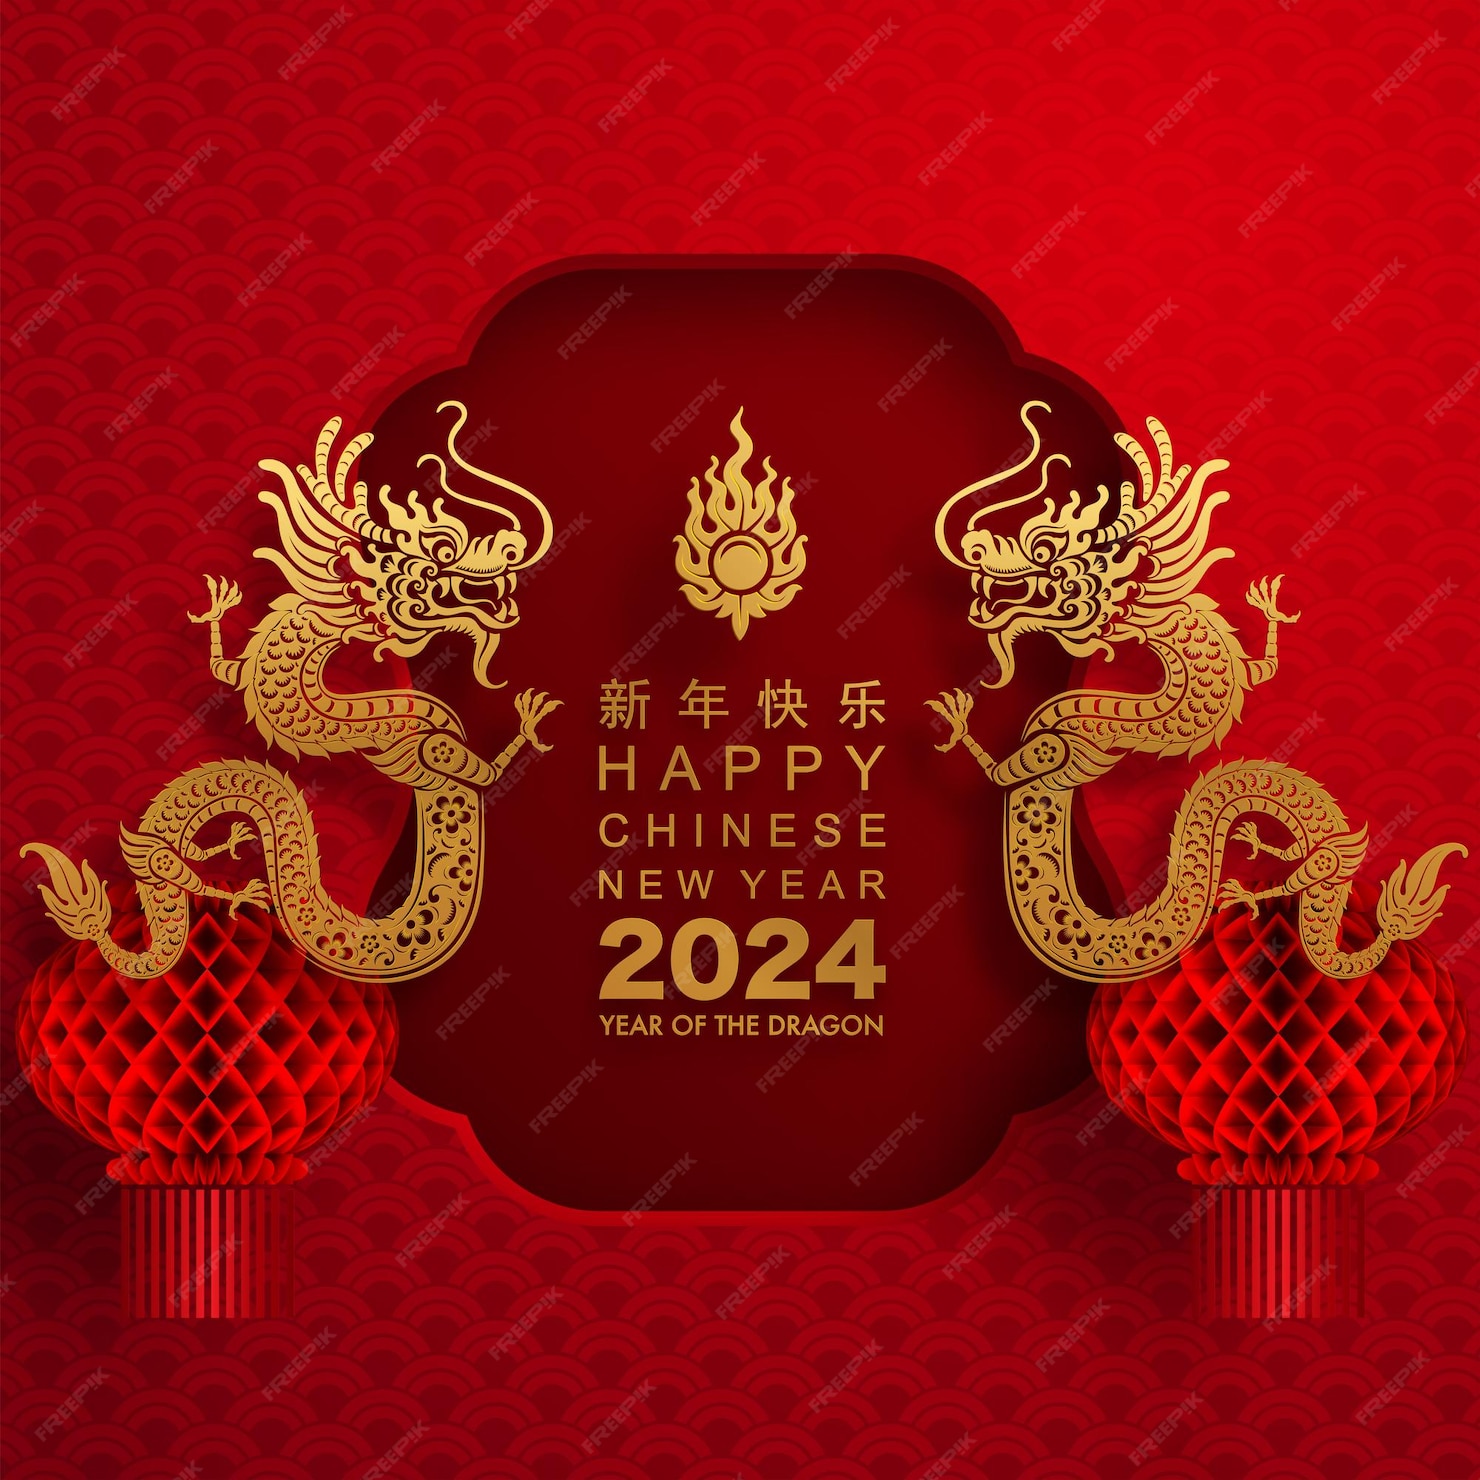 Premium Vector Happy chinese new year 2024 year of the dragon zodiac sign